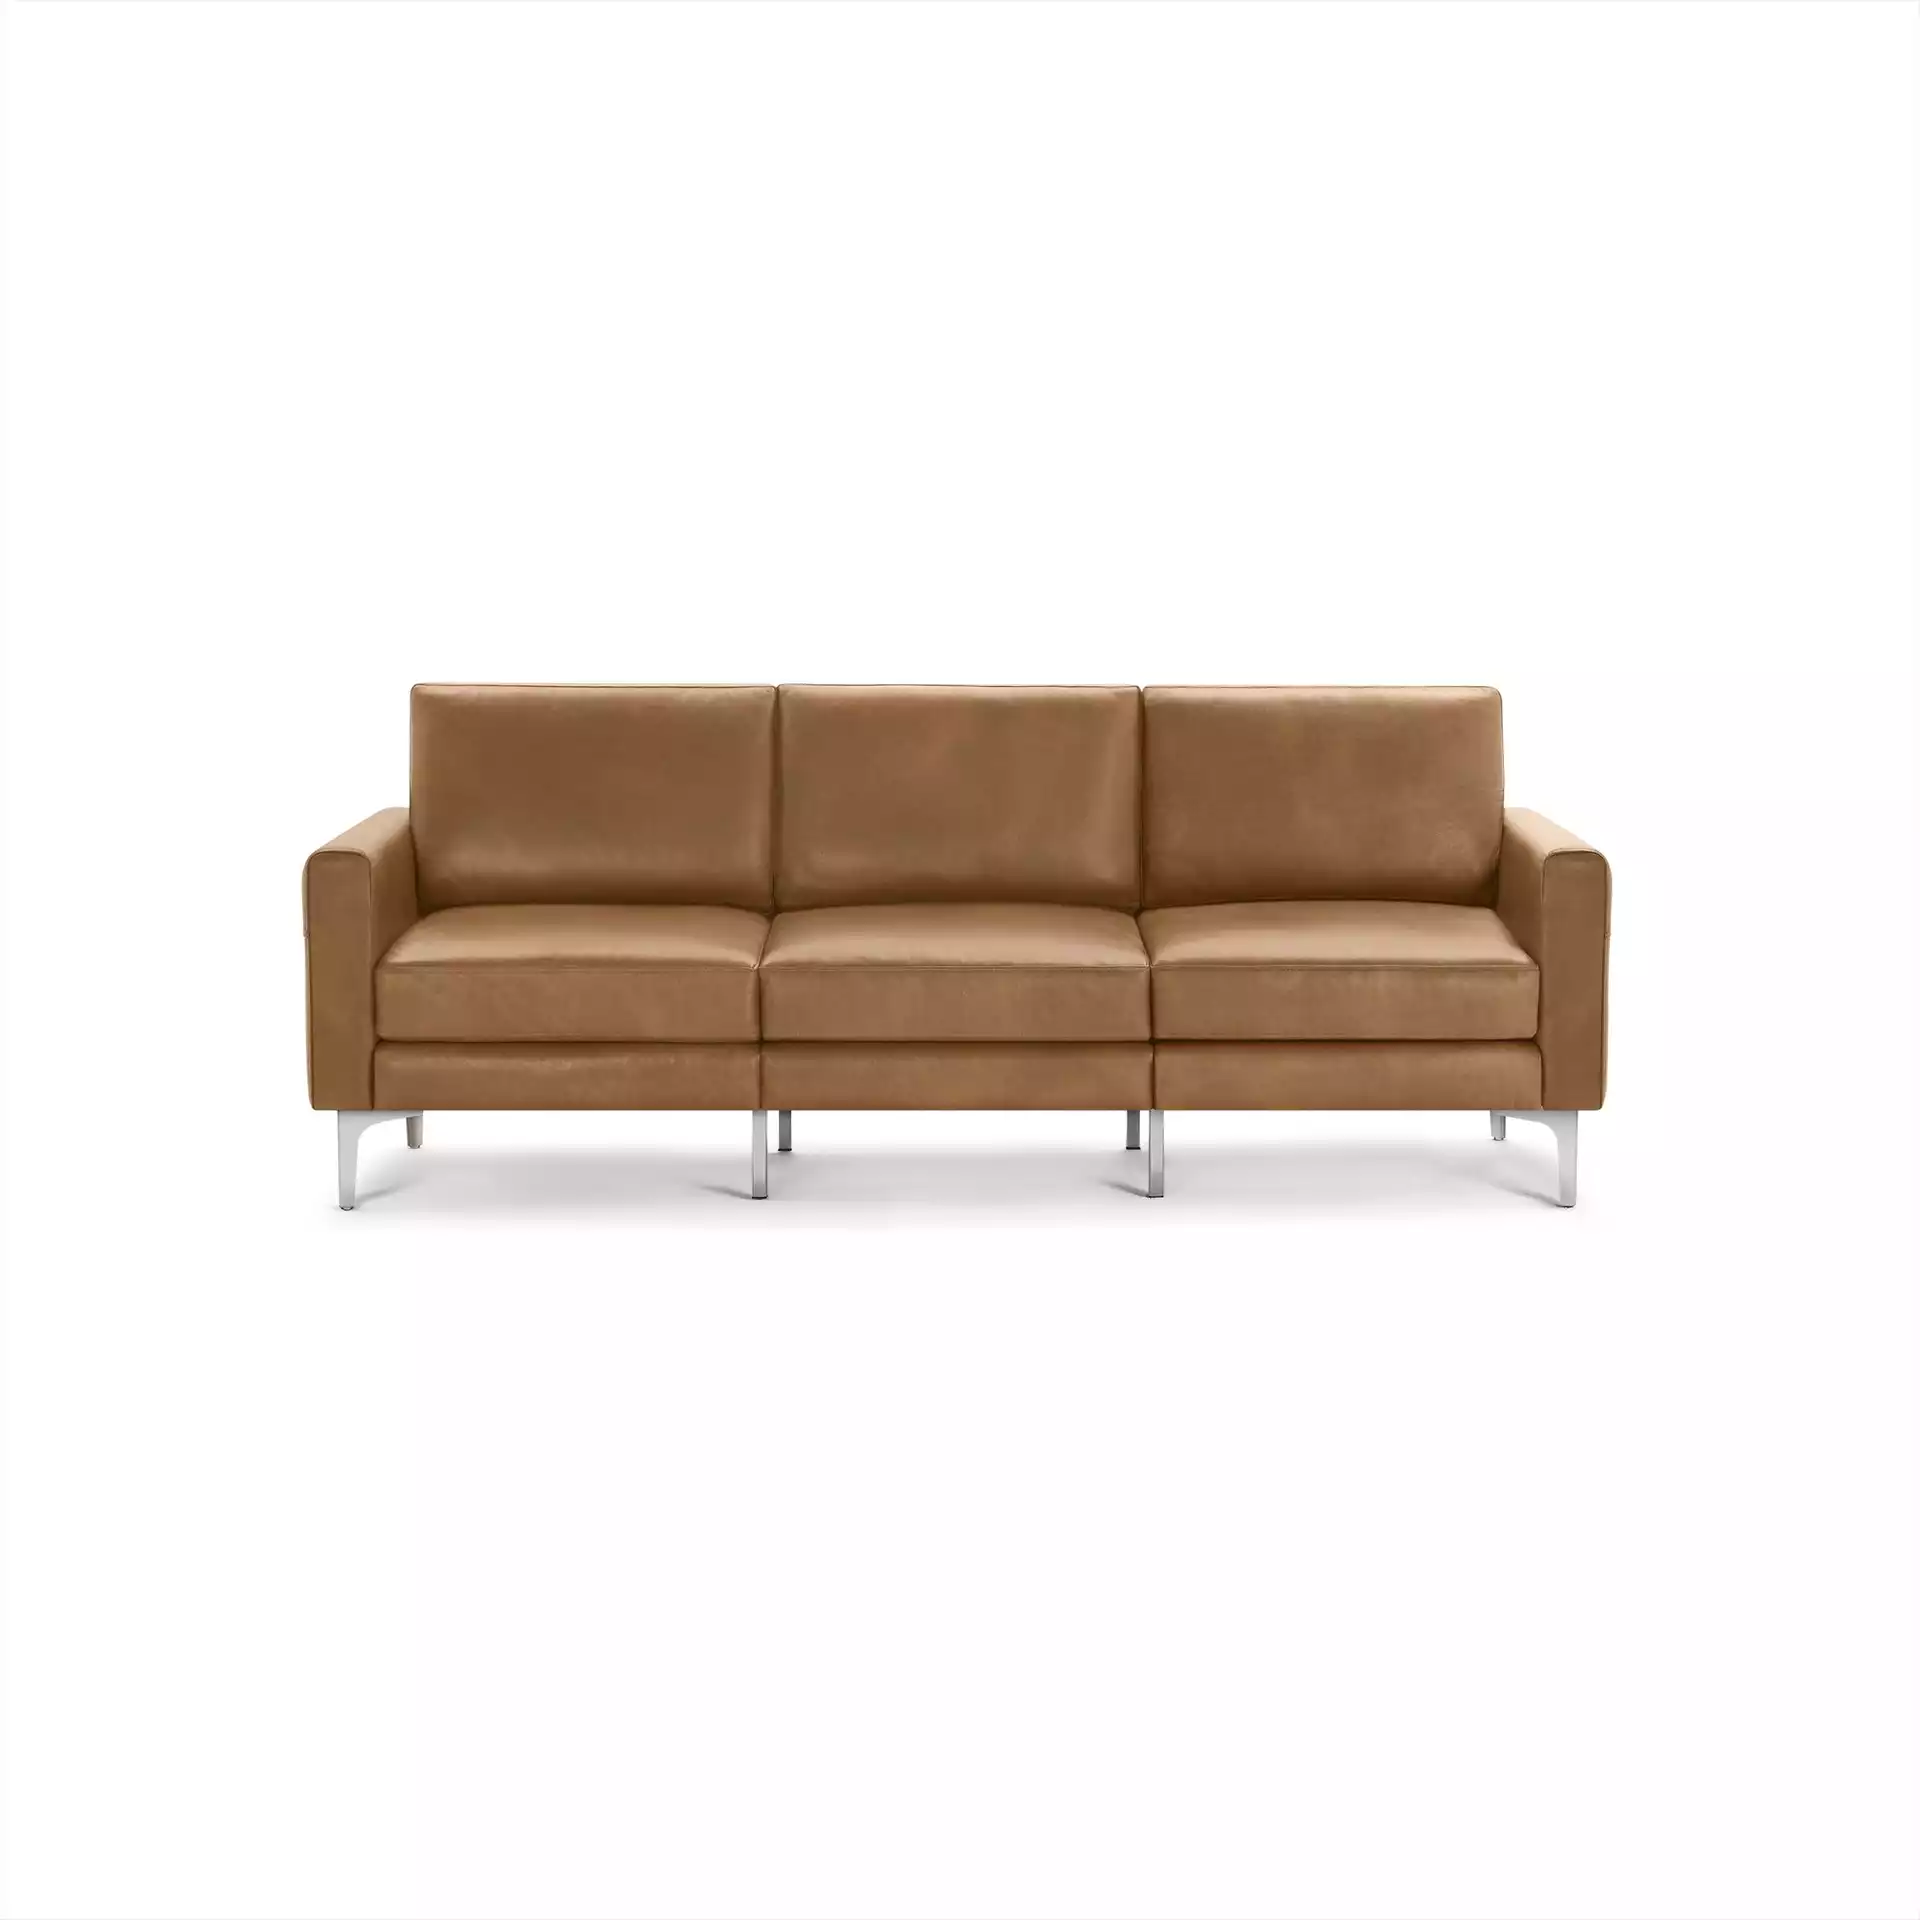 The Block Nomad Leather Sofa in Camel